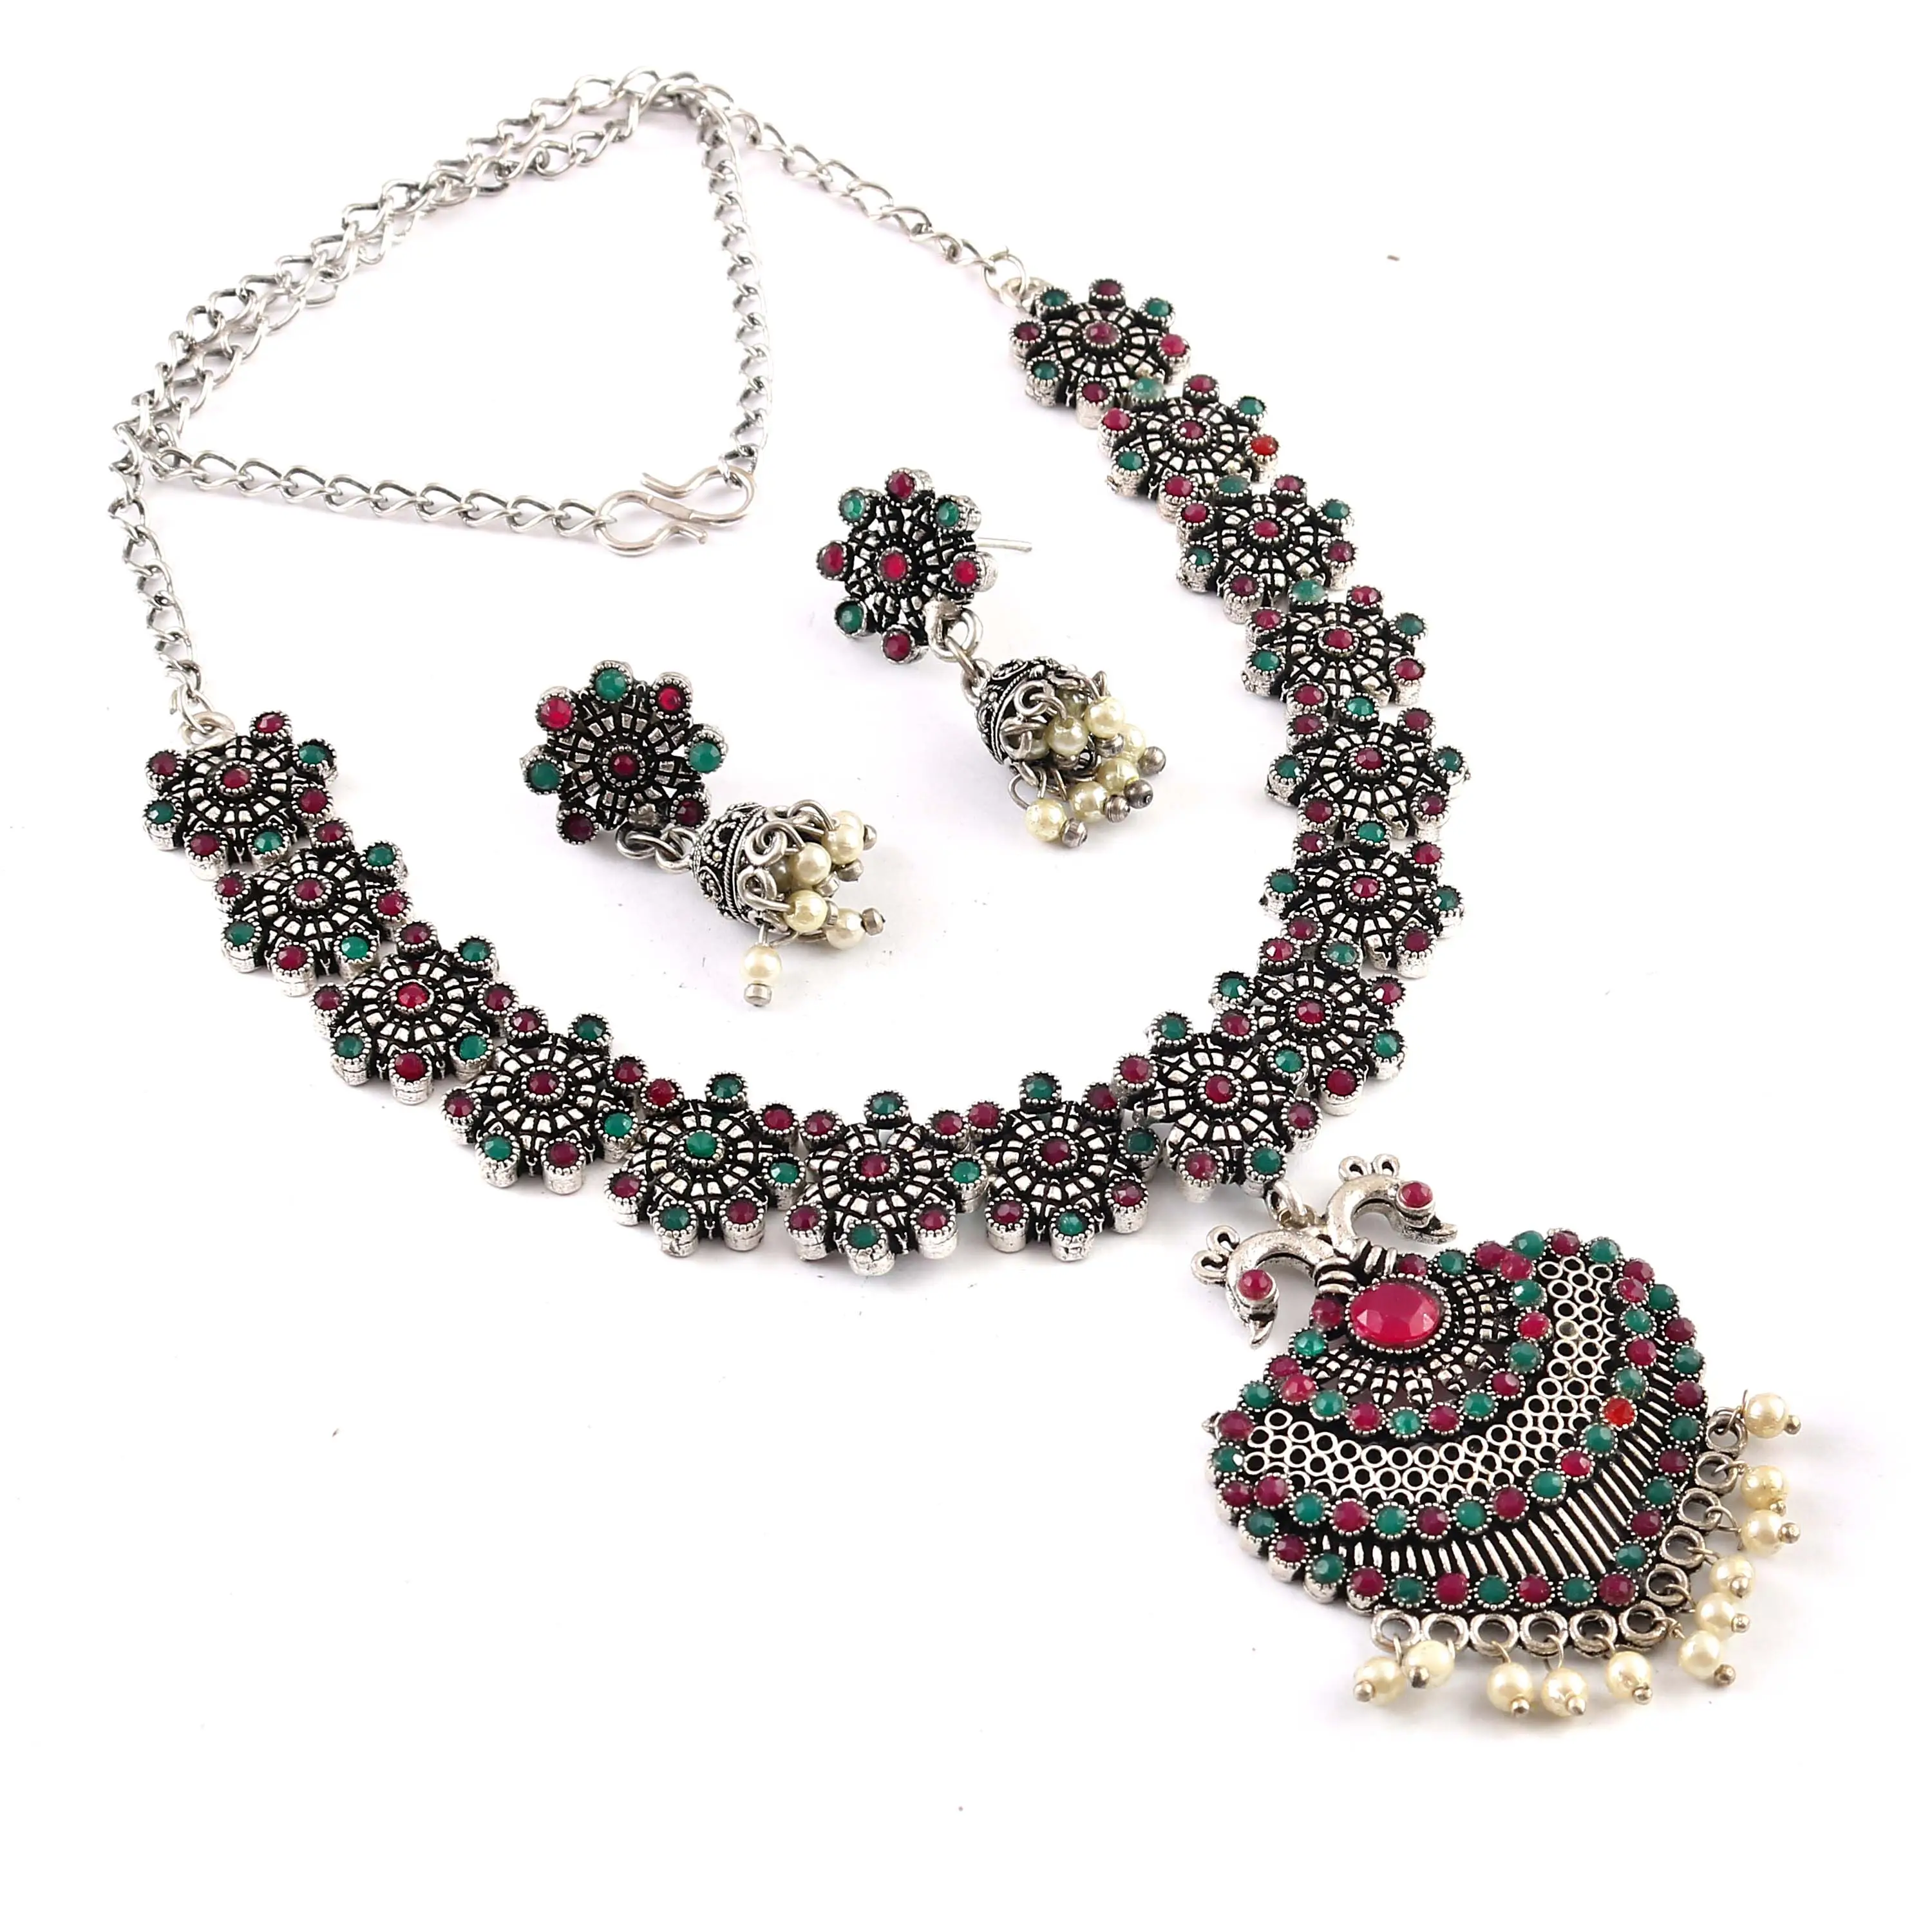 Oxidised Silver Plated Indian Traditional Pearl Stone Brass Jewelry Bollywood Handmade Fashion Necklace With Earring For Women